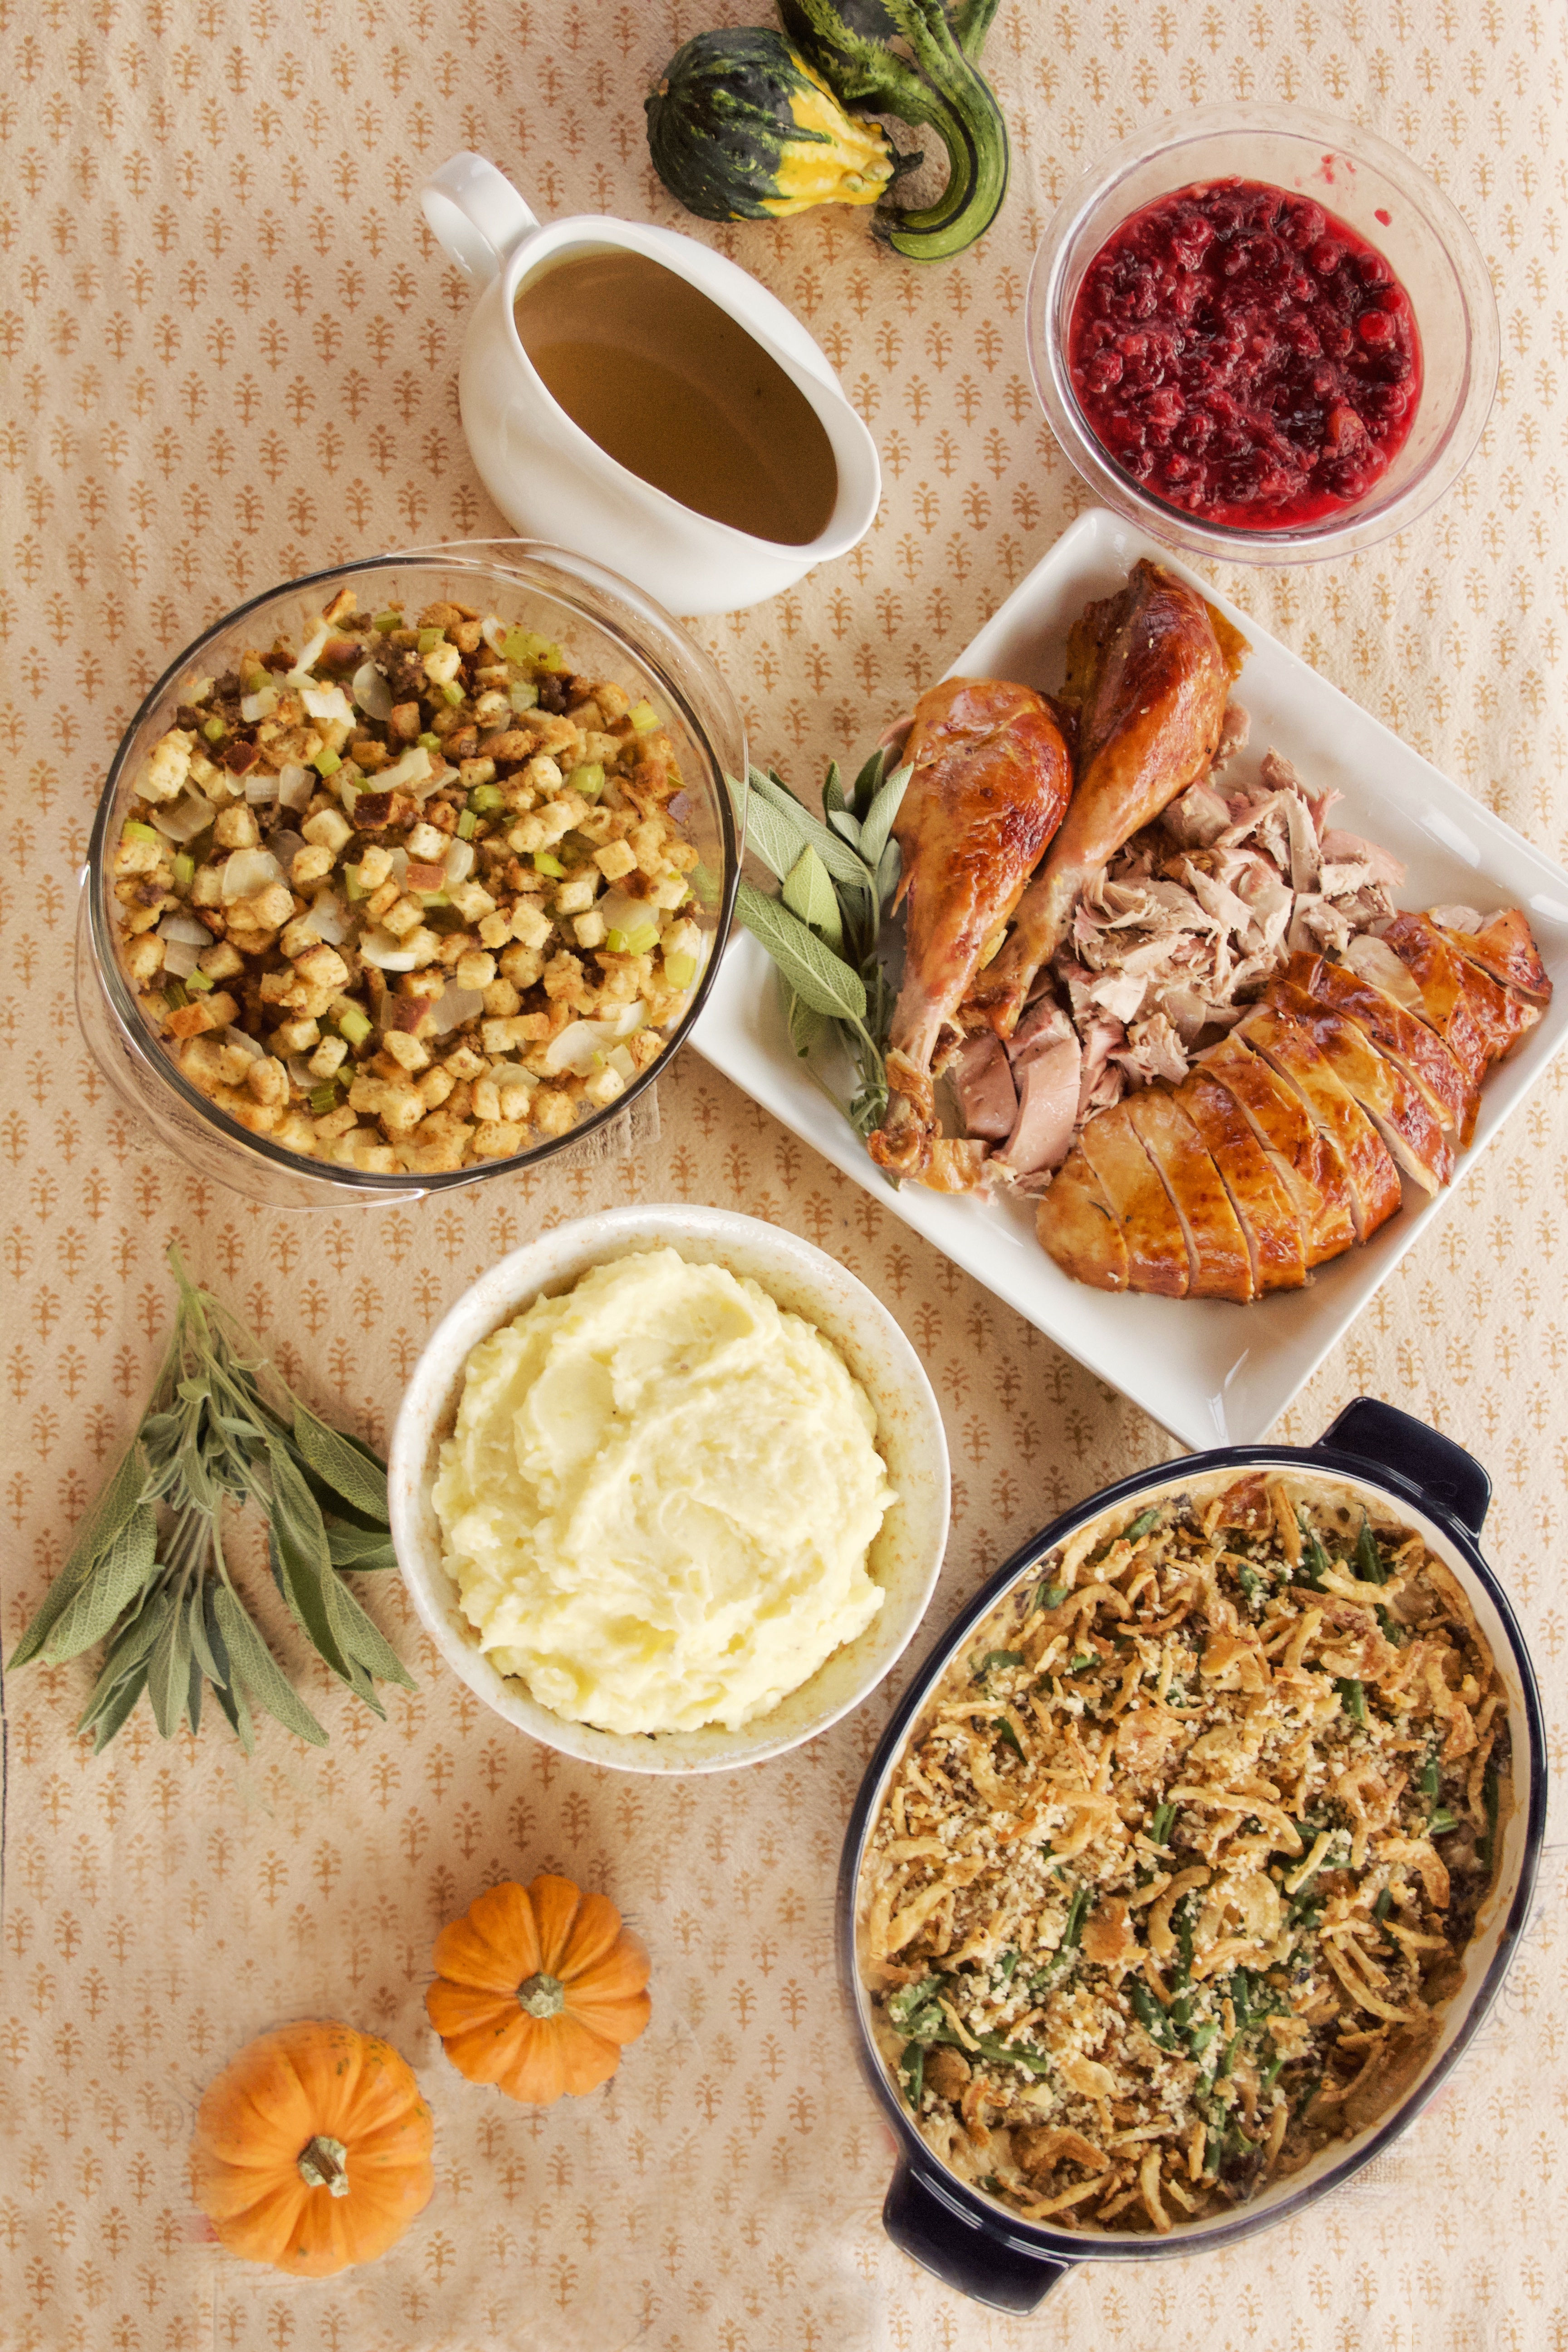 The Complete Work-Ahead Holiday Dinner Meal Plan spread (clockwise, from top left): Easy, Rich Turkey Gravy, Orange-Ginger-Spice Cranberry Sauce, Ultimate Classic Roast Turkey, Make-Ahead Green Bean Casserole, Creamy Meal-Prep Mashed Potatoes, and Easy Sausage Stuffing. The spread is accented with tiny gourds and a sprig of sage.